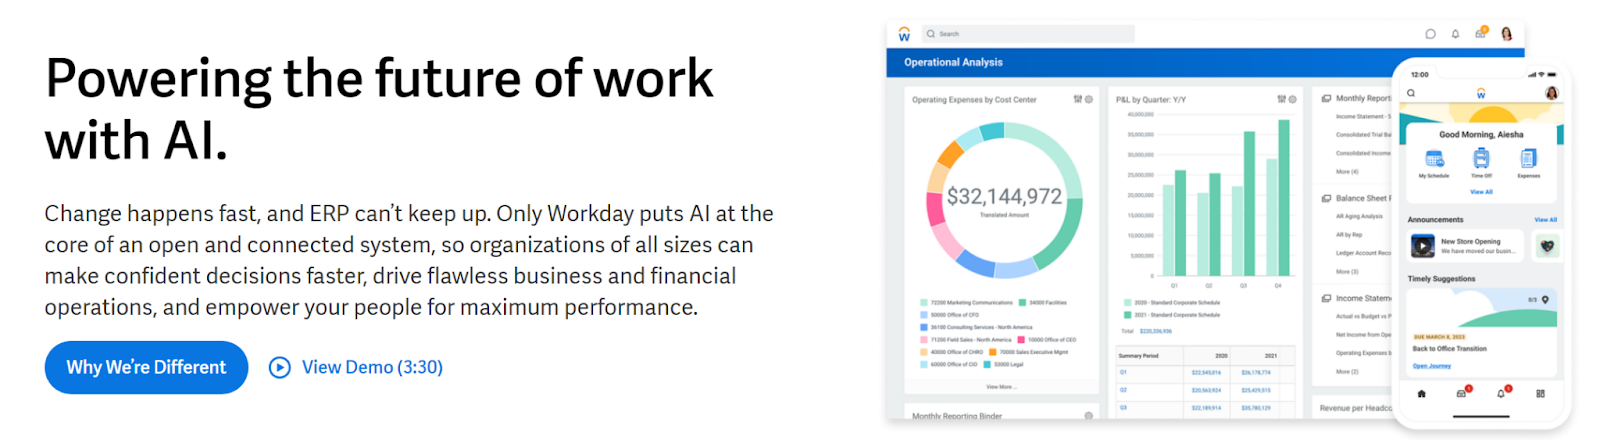 Image showing Workday as digital onboarding software